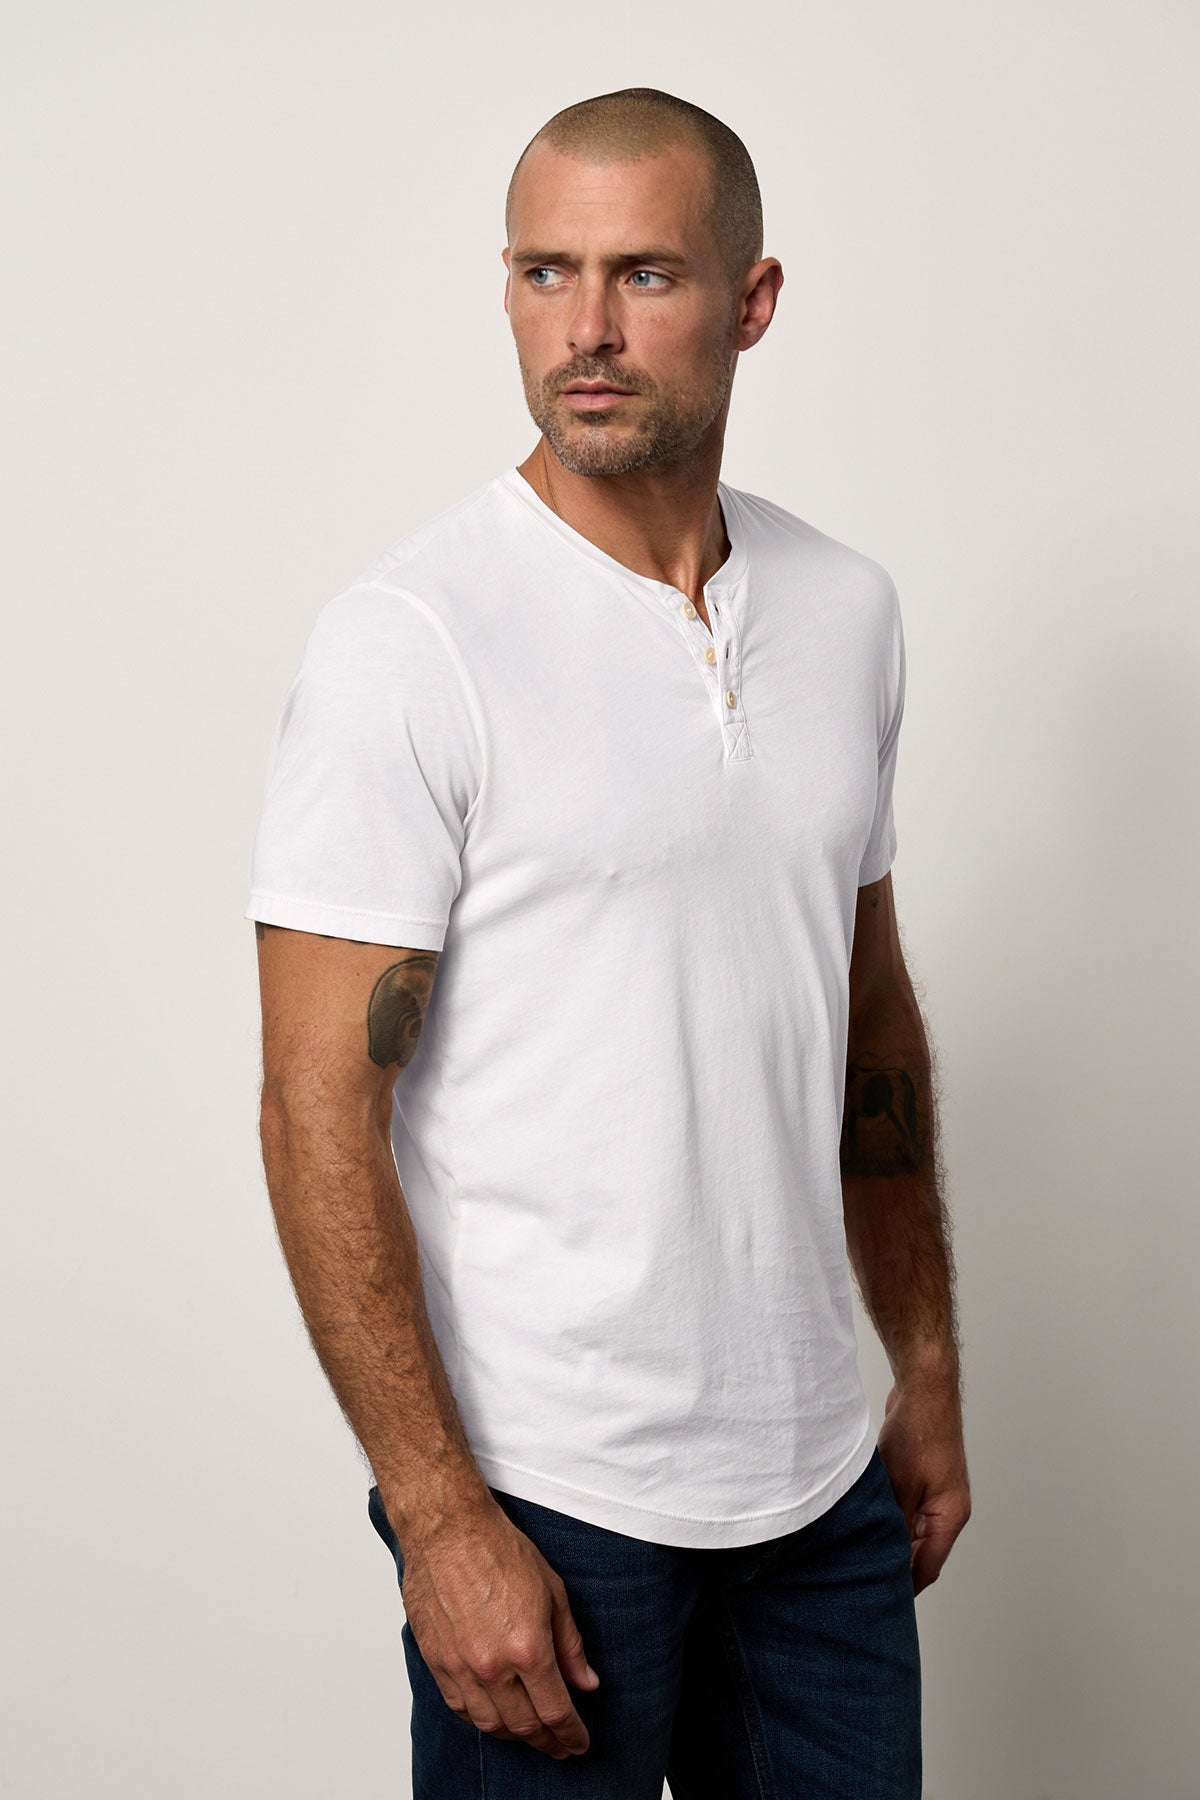 A man with a shaved head, wearing a white Velvet by Graham & Spencer Fulton Henley and dark jeans, stands against a plain background, looking to his left.-36640141148353